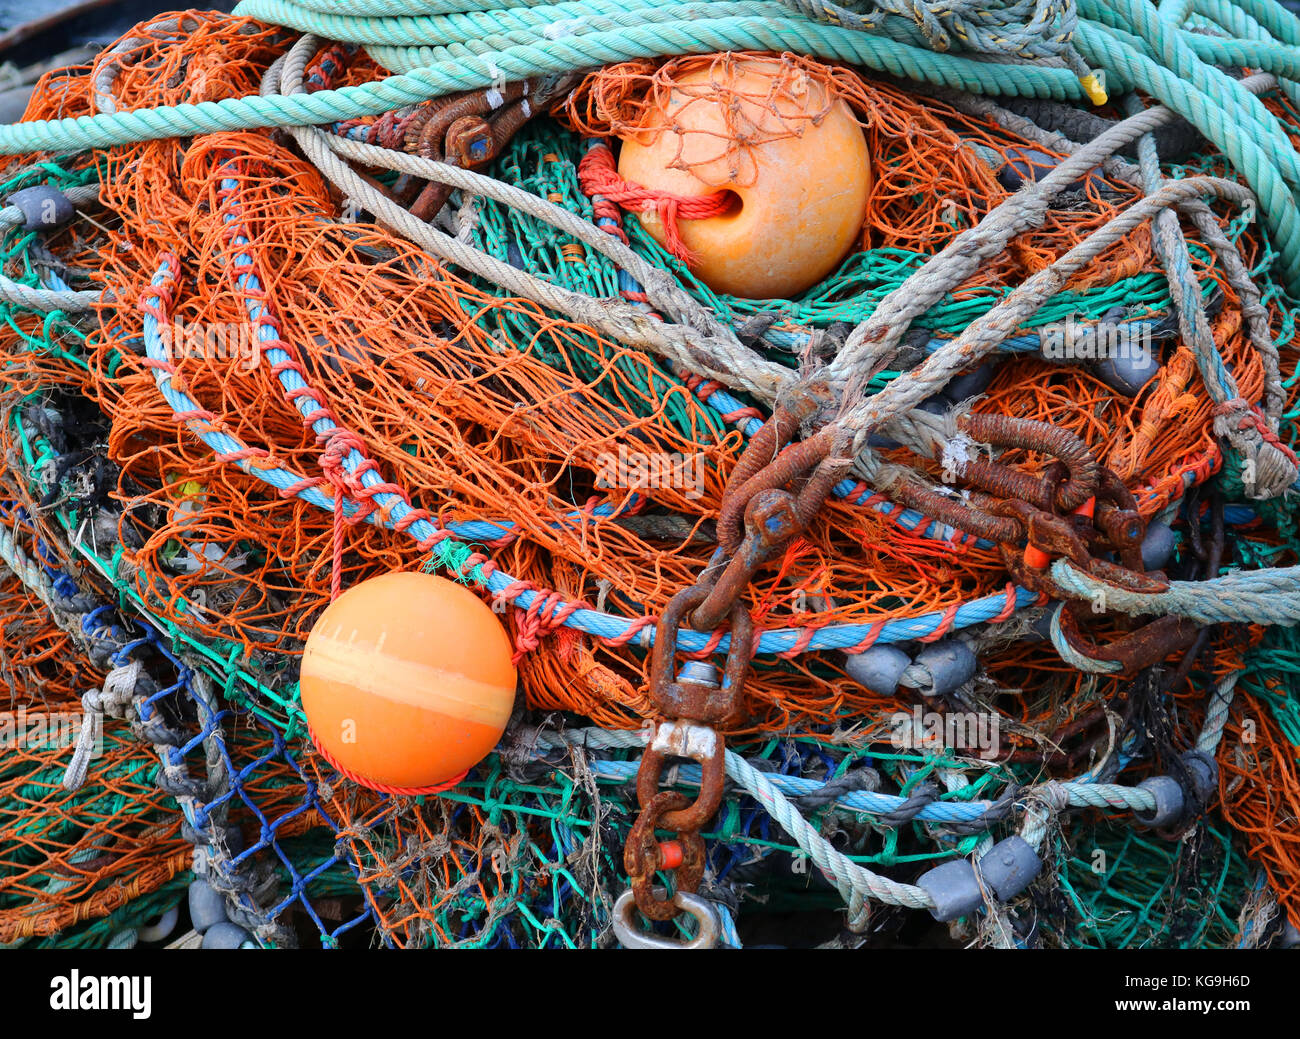 Pile of Fish Nets Buoys and Chains Close Up Stock Photo